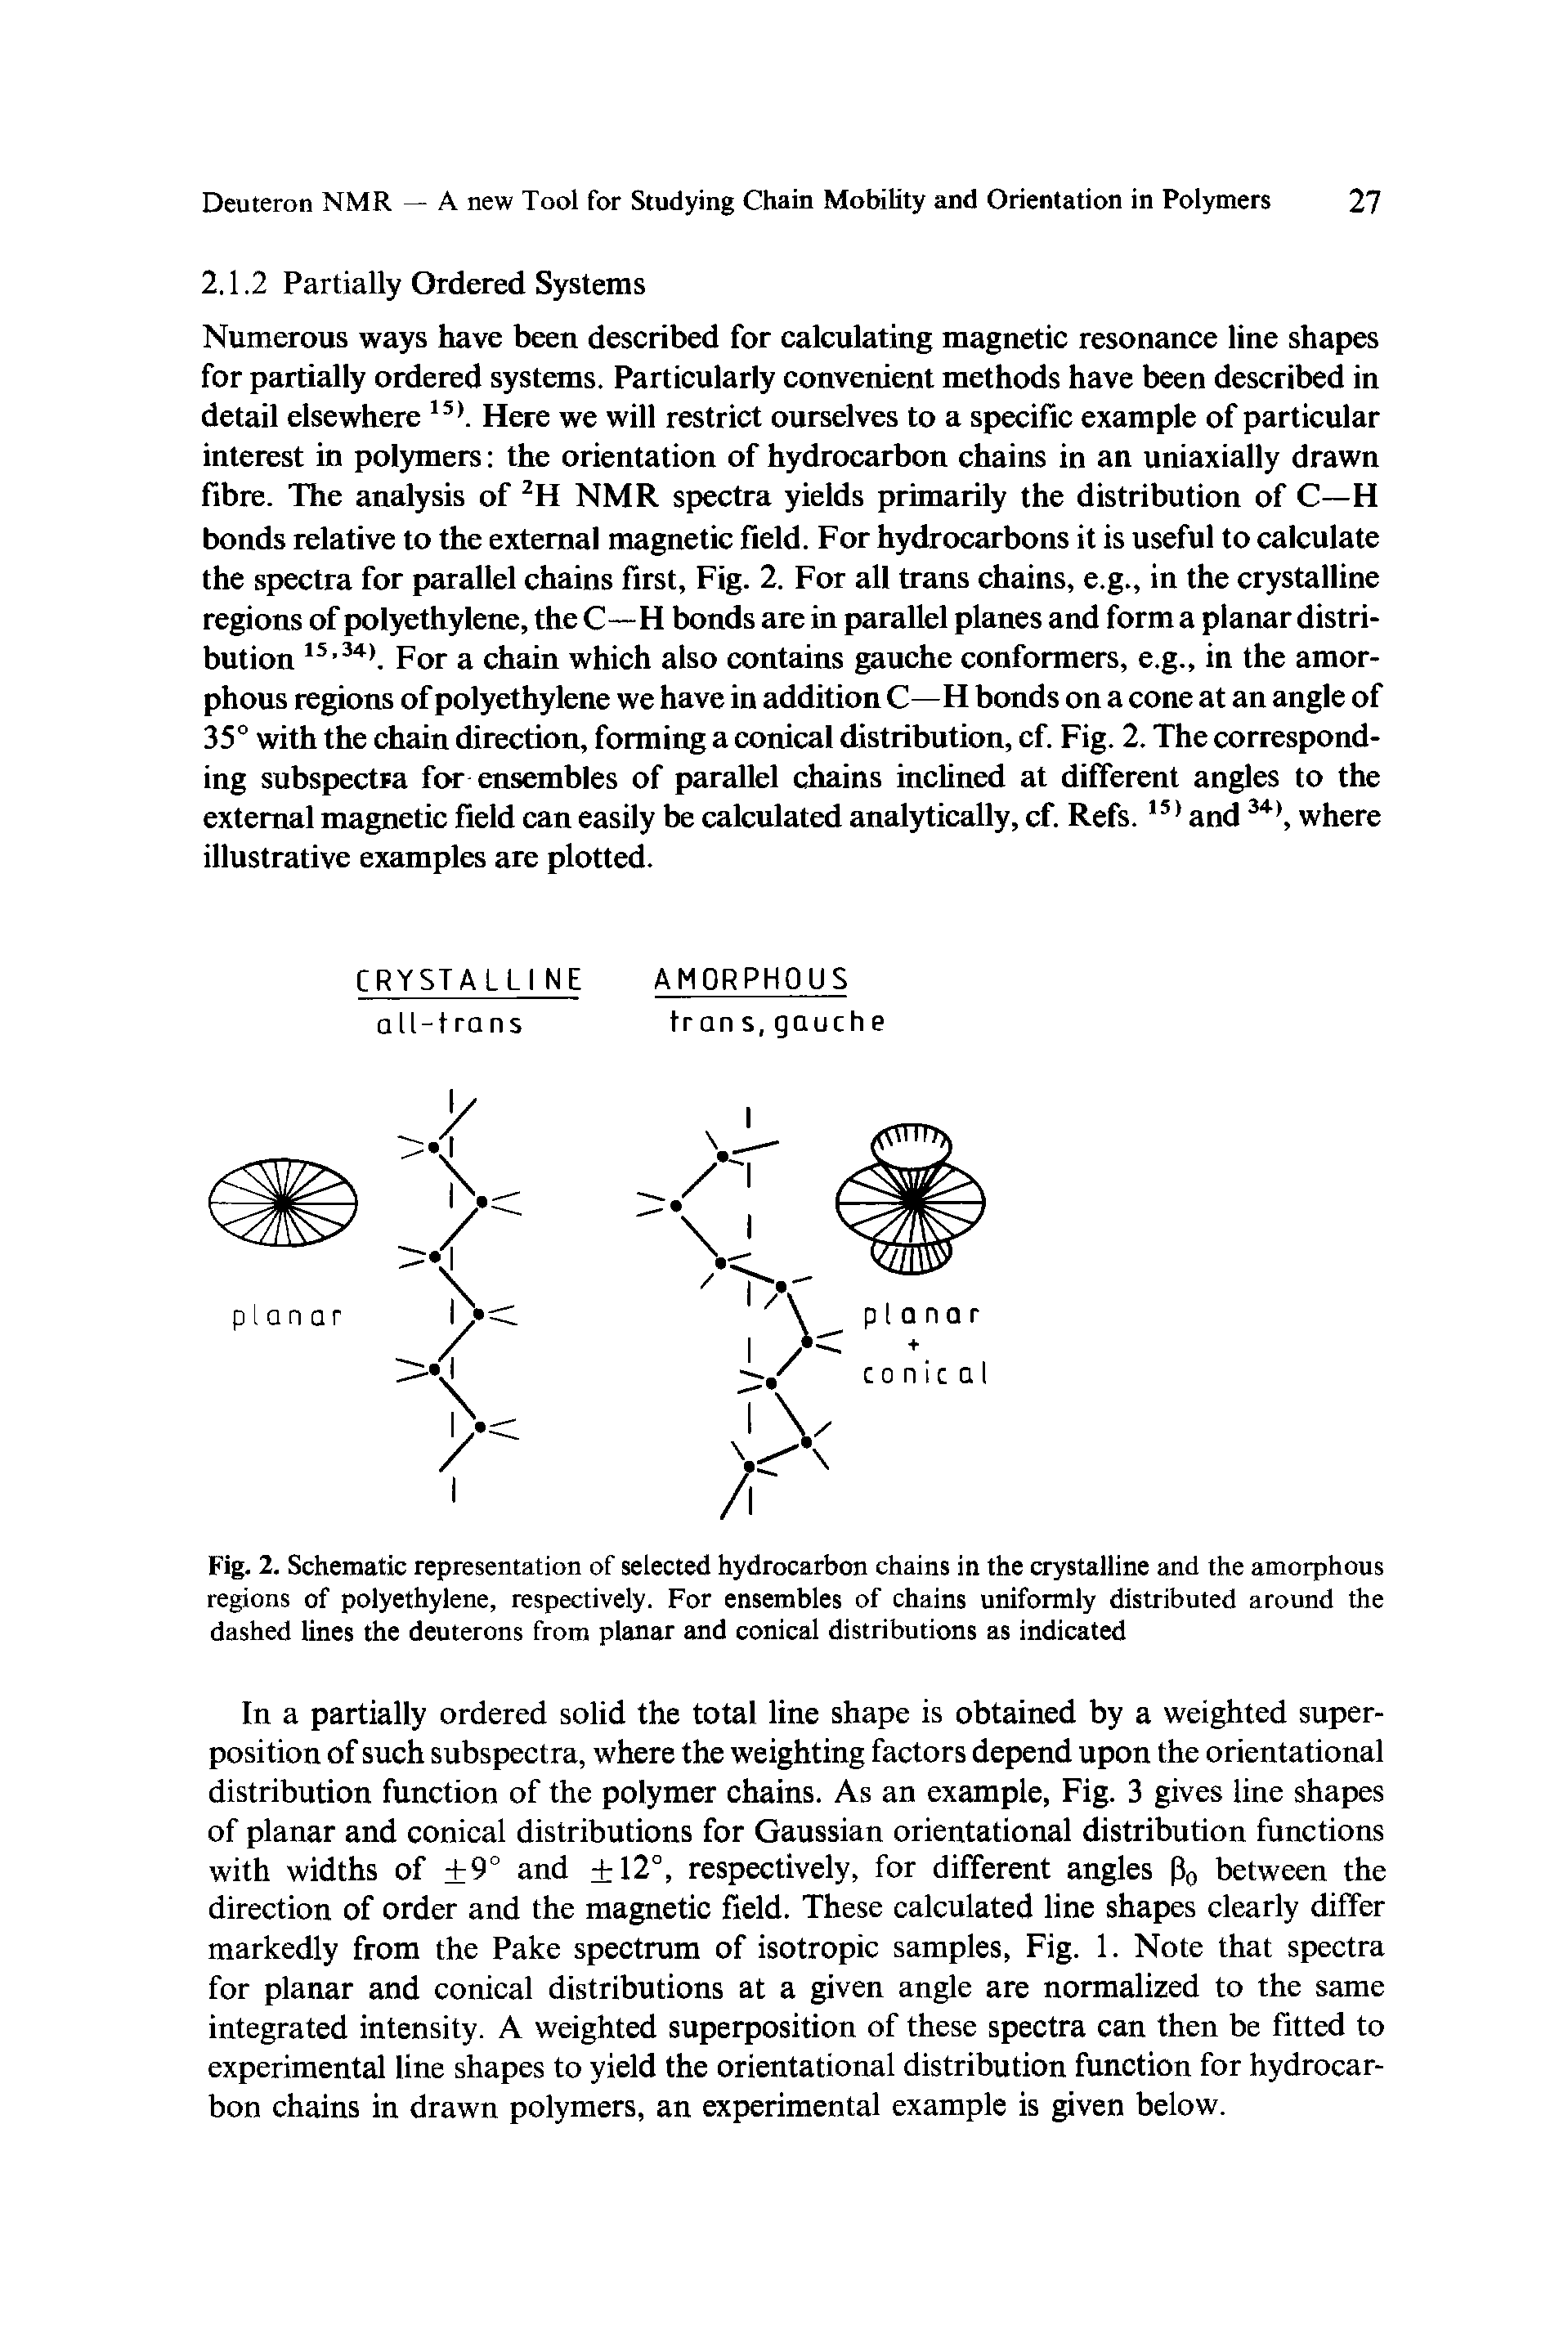 Fig. 2. Schematic representation of selected hydrocarbon chains in the crystalline and the amorphous regions of polyethylene, respectively. For ensembles of chains uniformly distributed around the dashed lines the deuterons from planar and conical distributions as indicated...